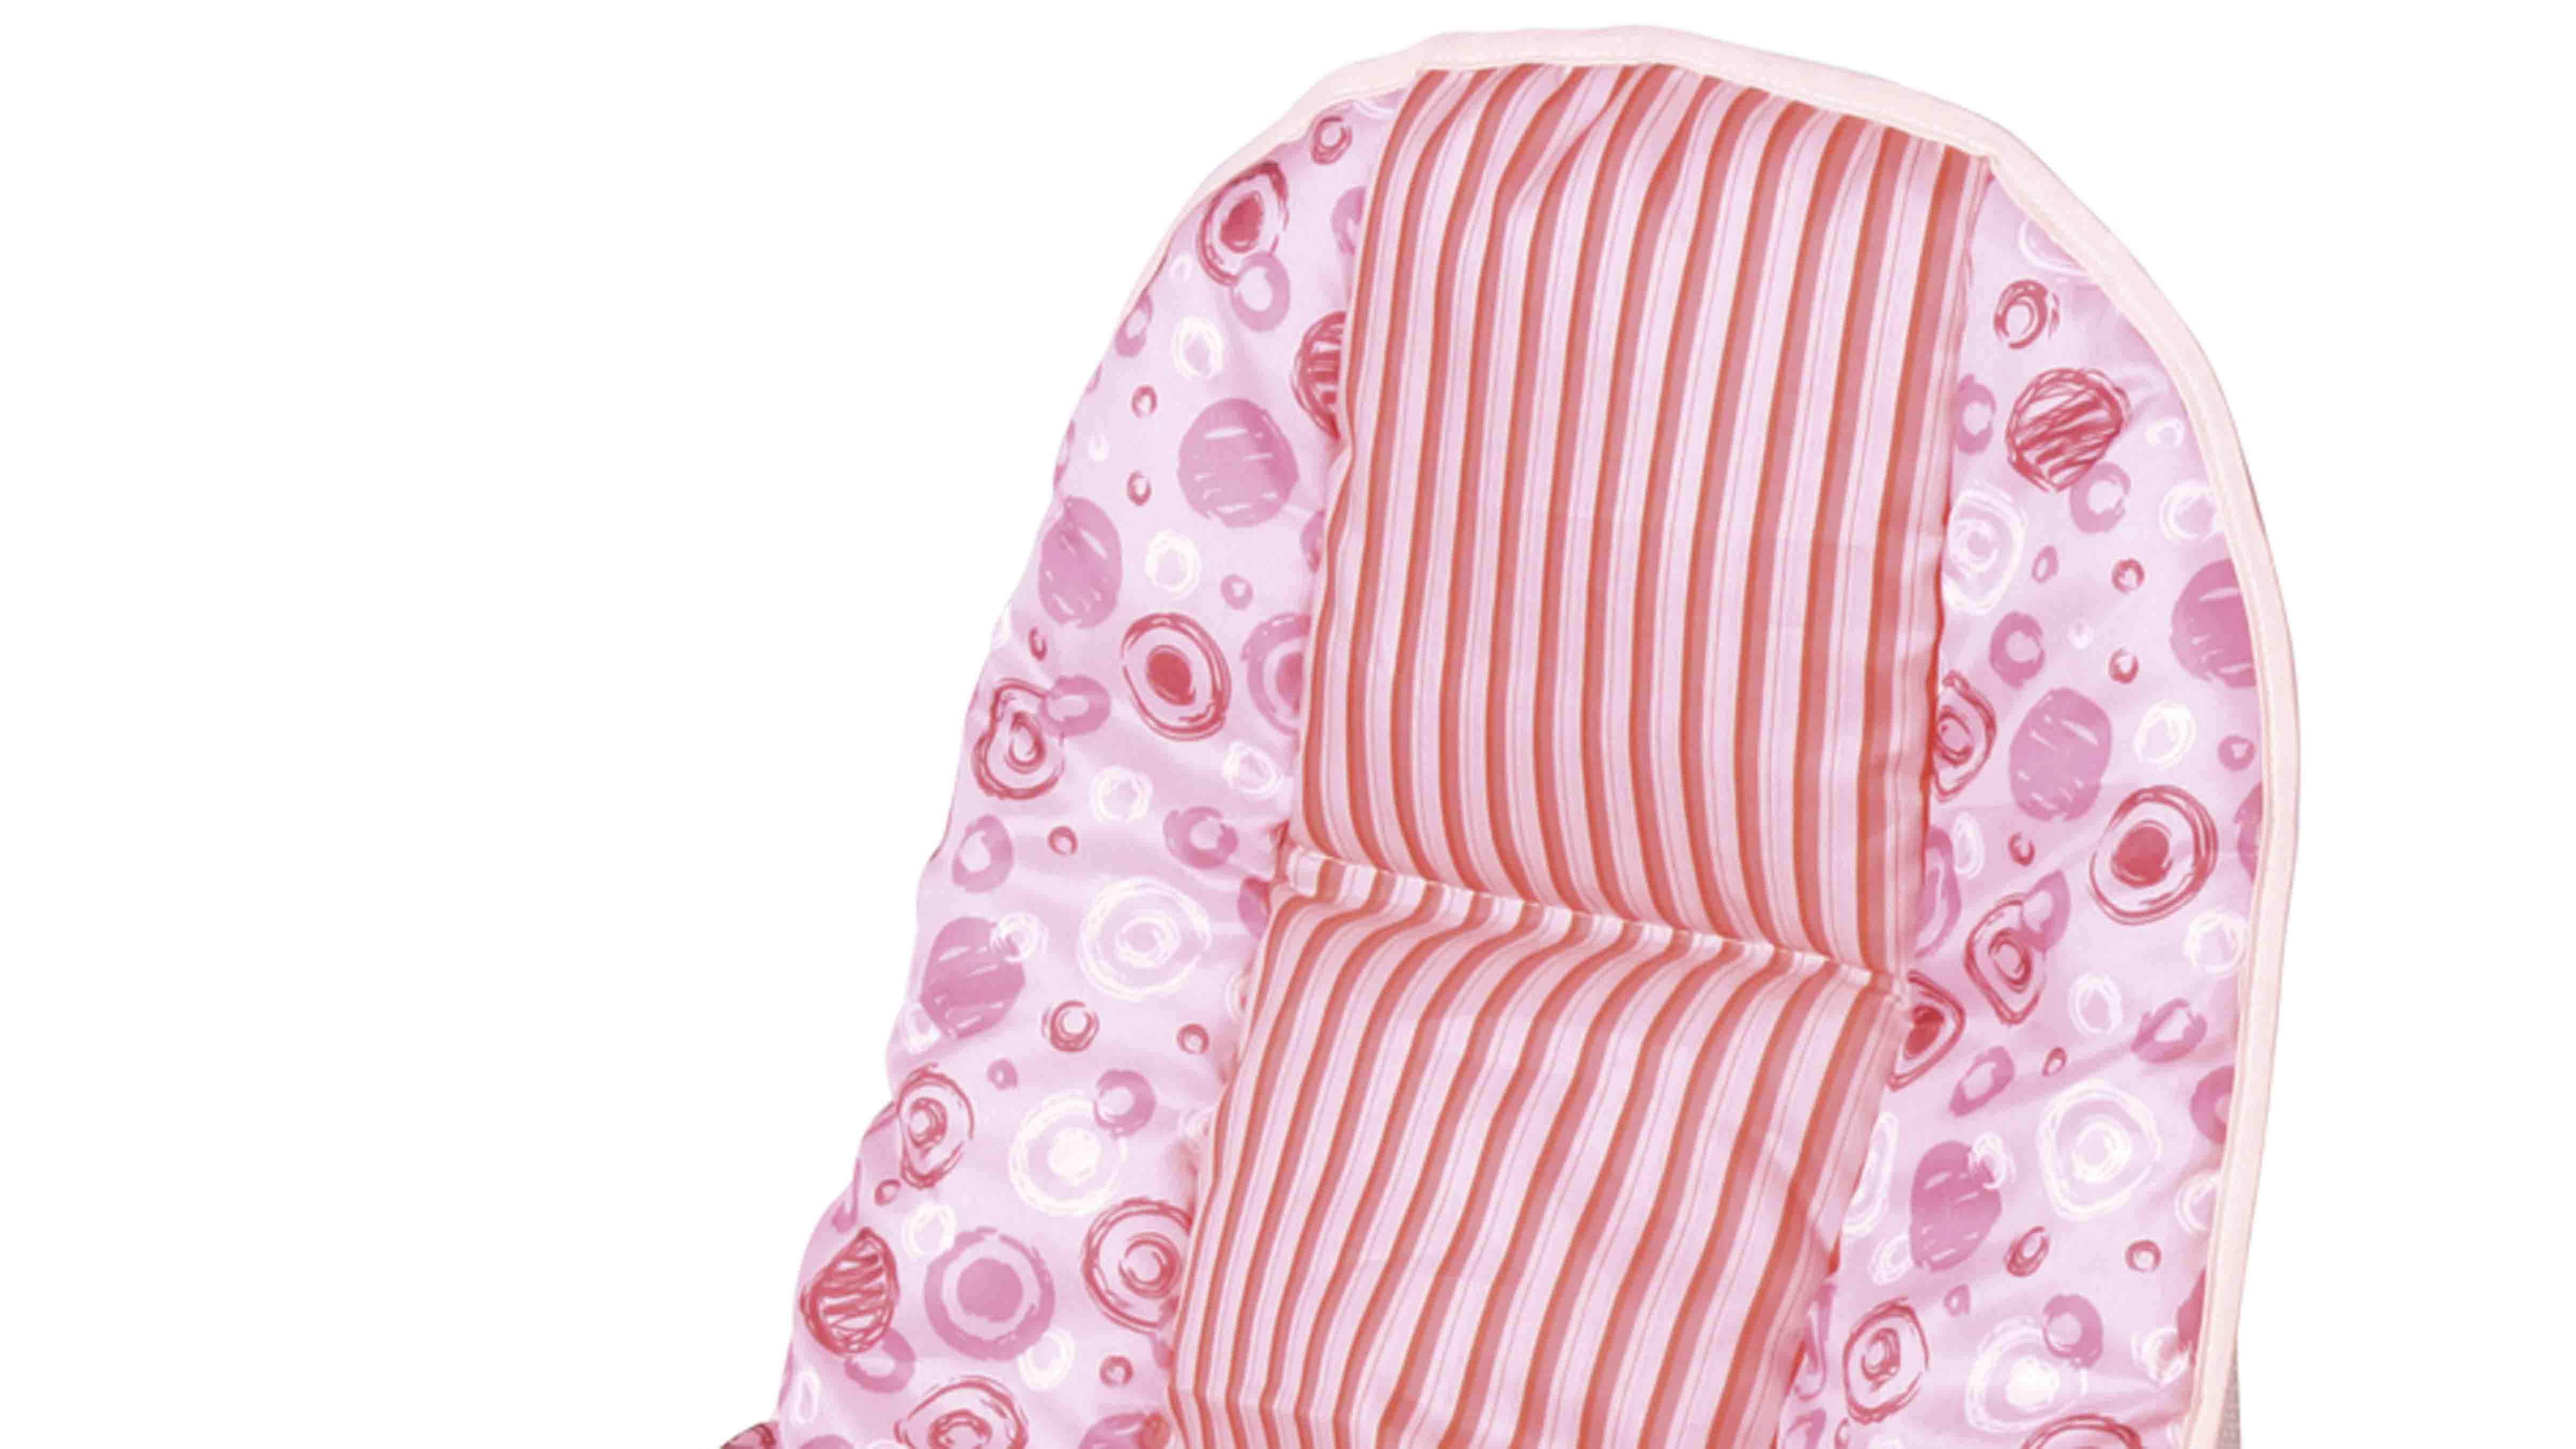 simple portable baby bouncer supplier for toddler